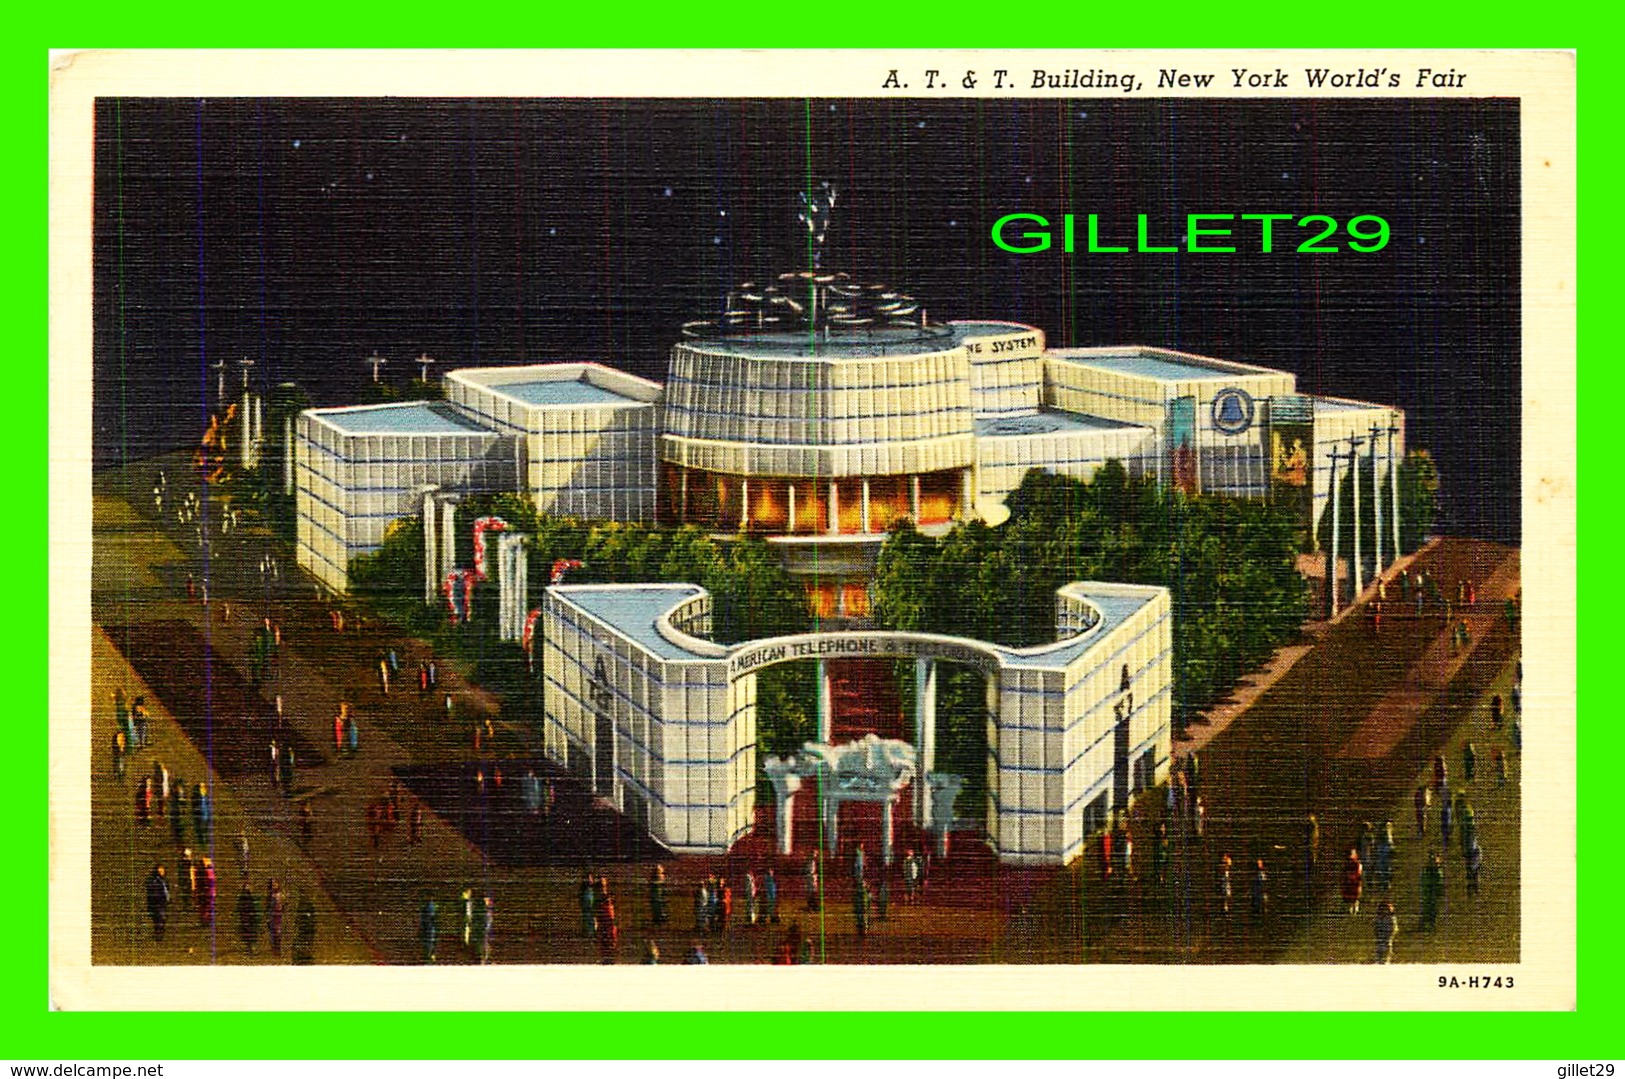 NEW YORK CITY, NY - A. T. & T. BUILDING, NEW YORK WORLD'S FAIR, 1939 - INTERBOROUGH NEWS CO - - Exhibitions